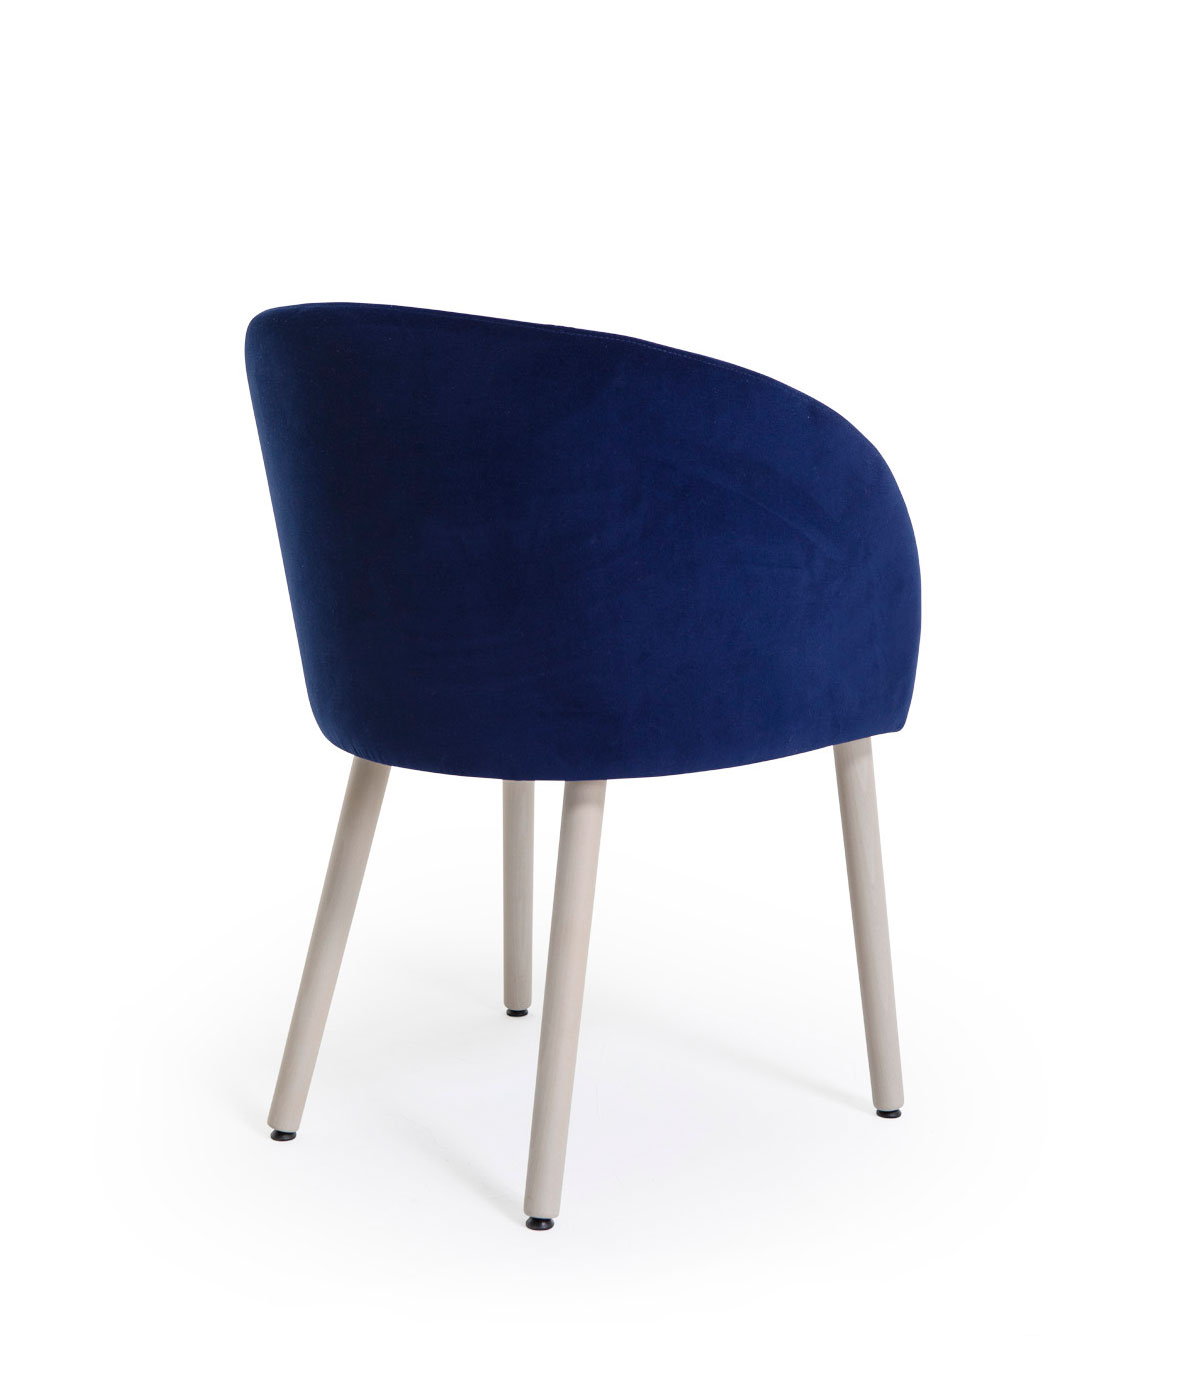 Cistell Original chair with armrests and wooden legs - Vergés